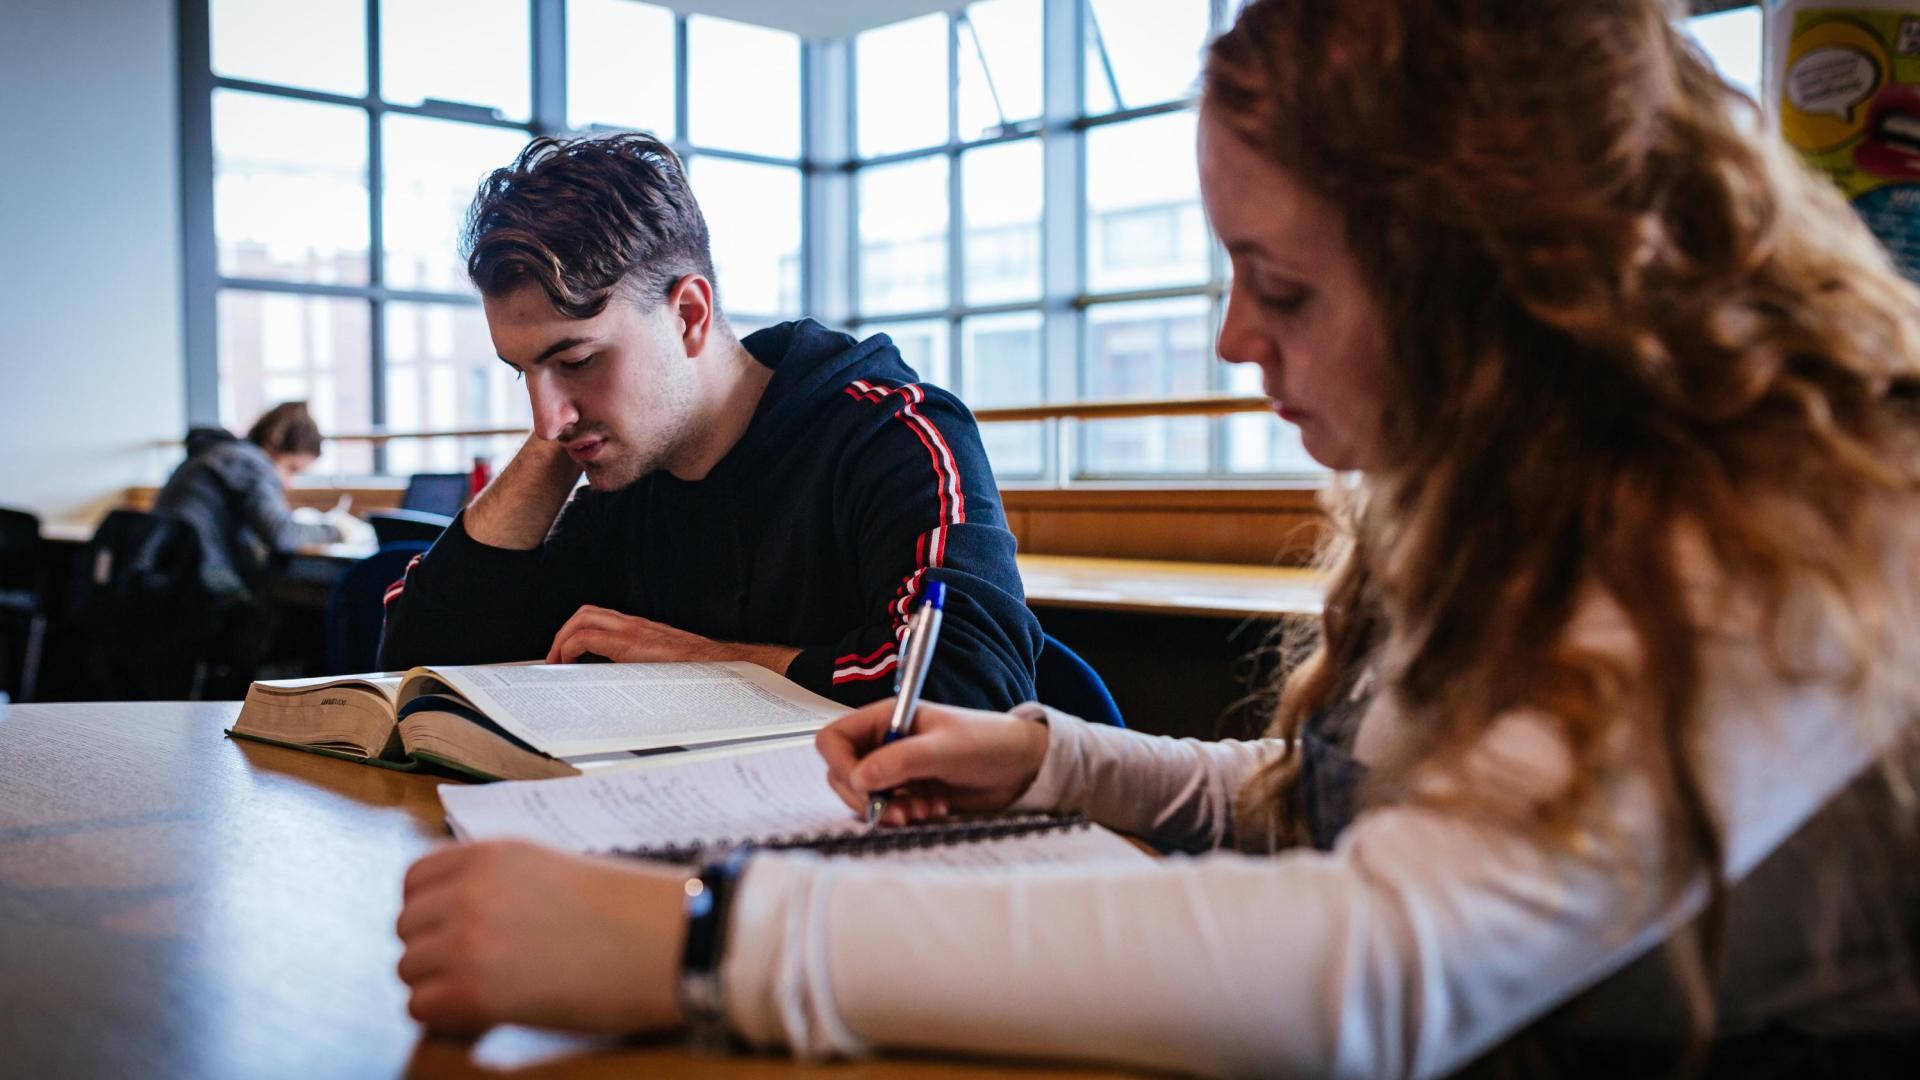 2 students studying in O' Reilly library